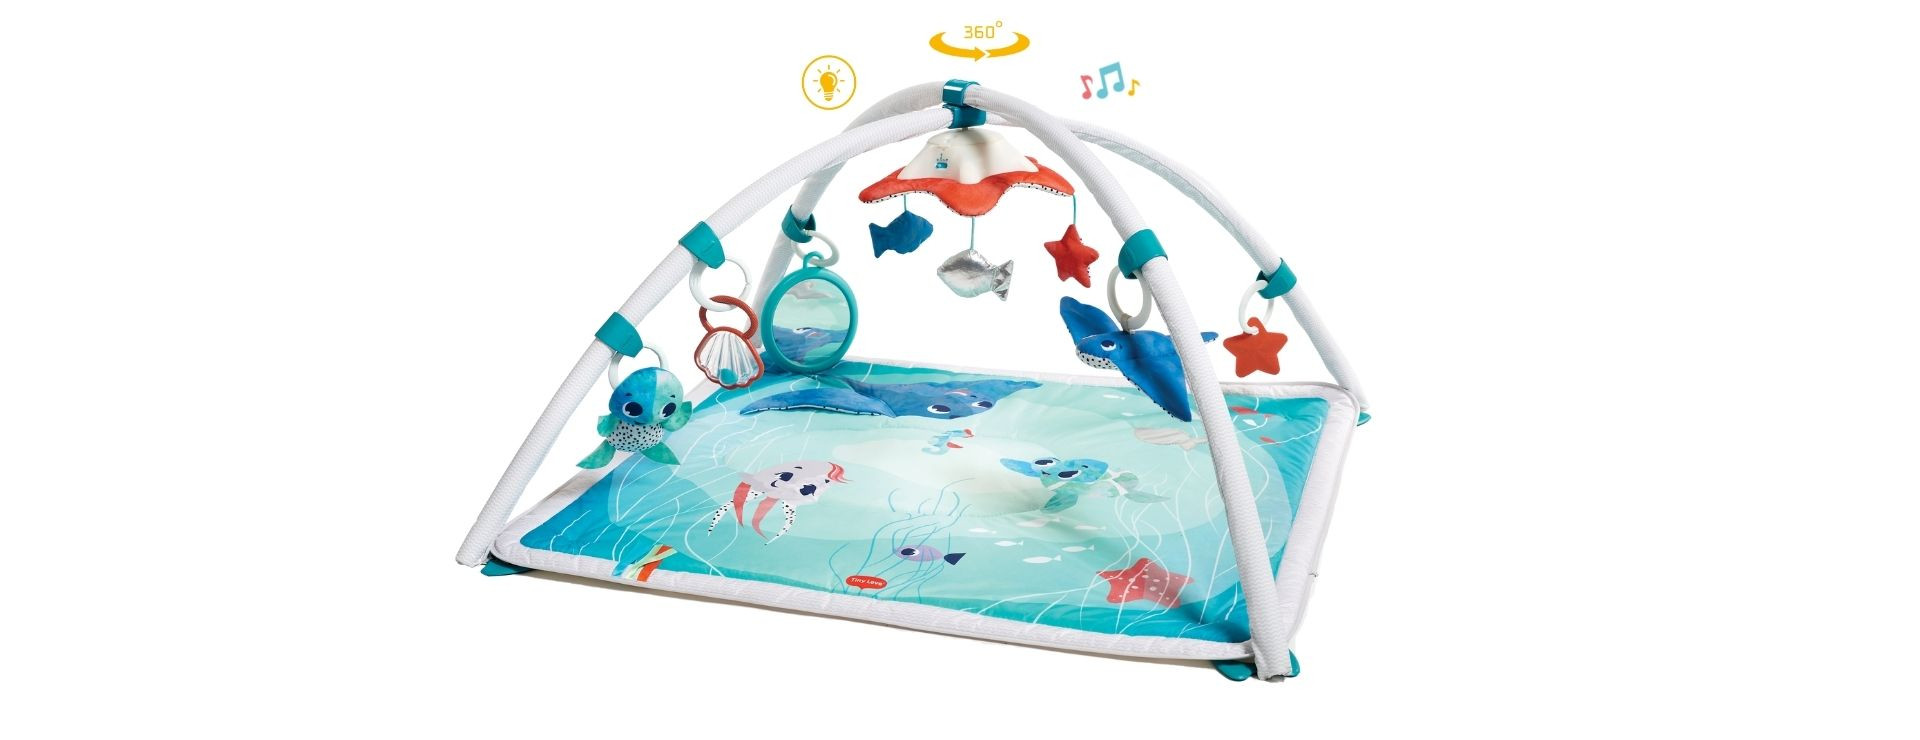 evenwicht Klap Uitwisseling Treasure the Ocean™ 2-in-1 Musical Mobile Gymini - Gymini® & Activity Gyms